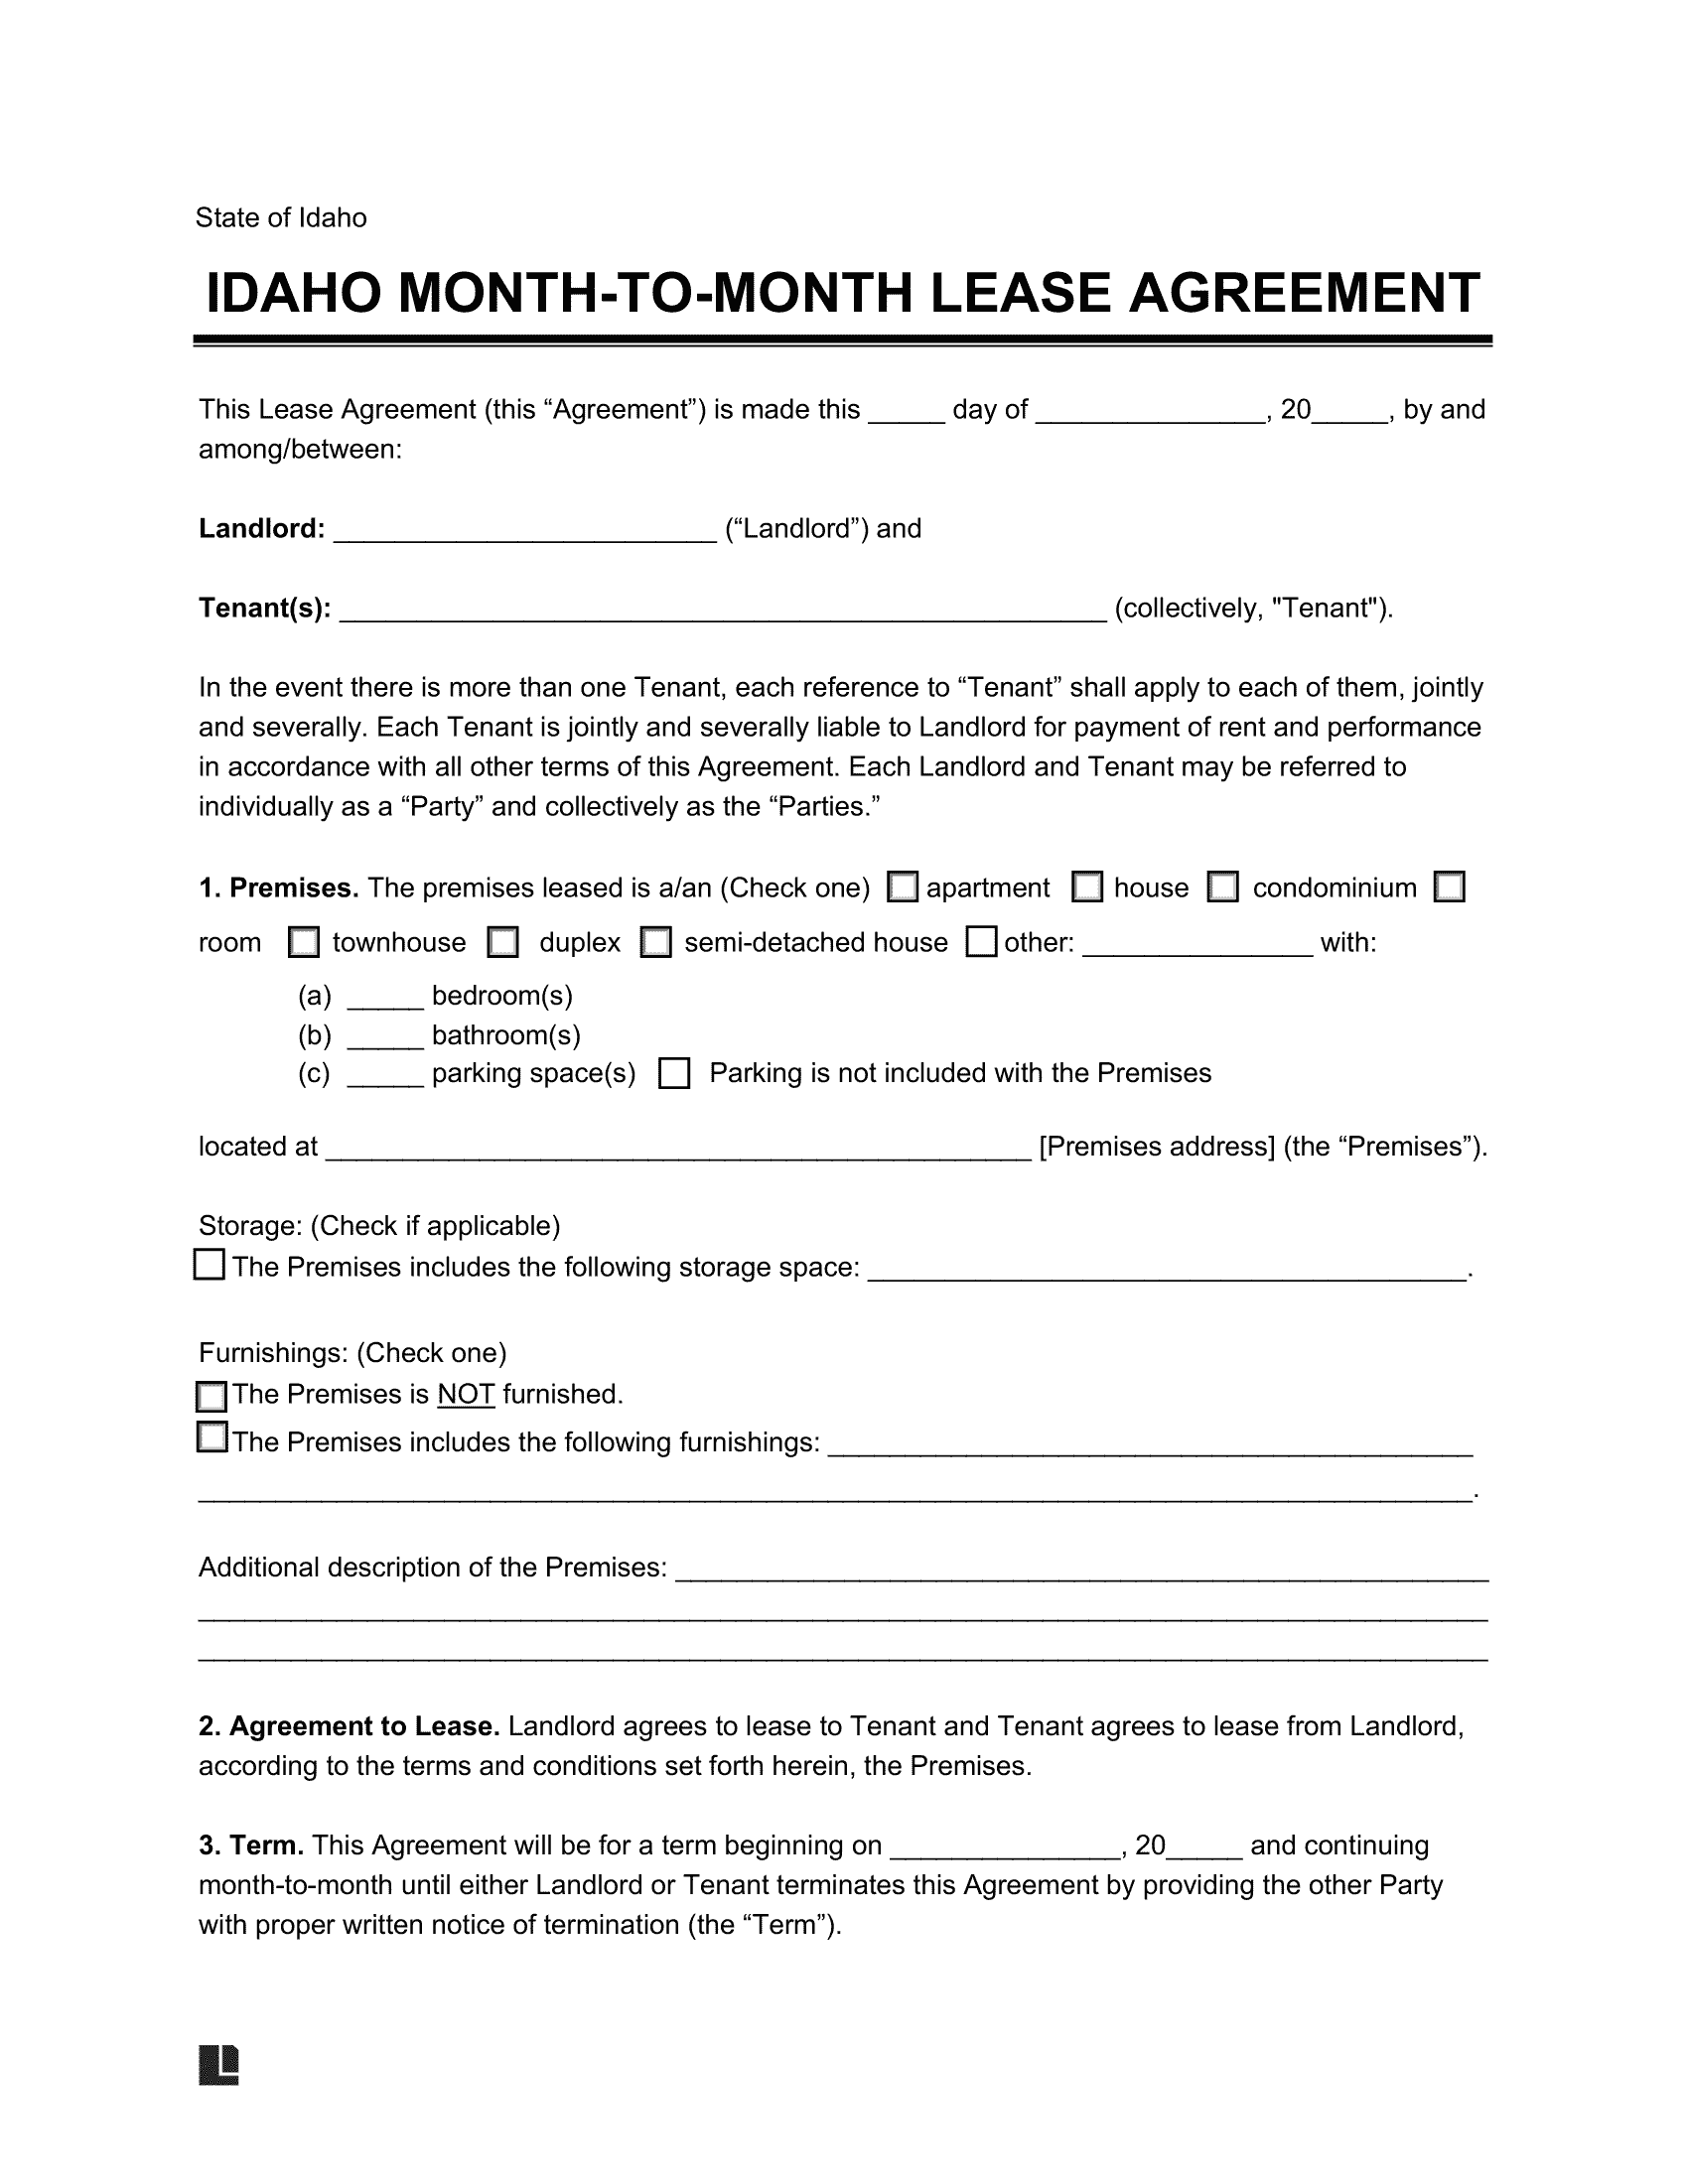 Idaho Month-to-Month Rental Agreement